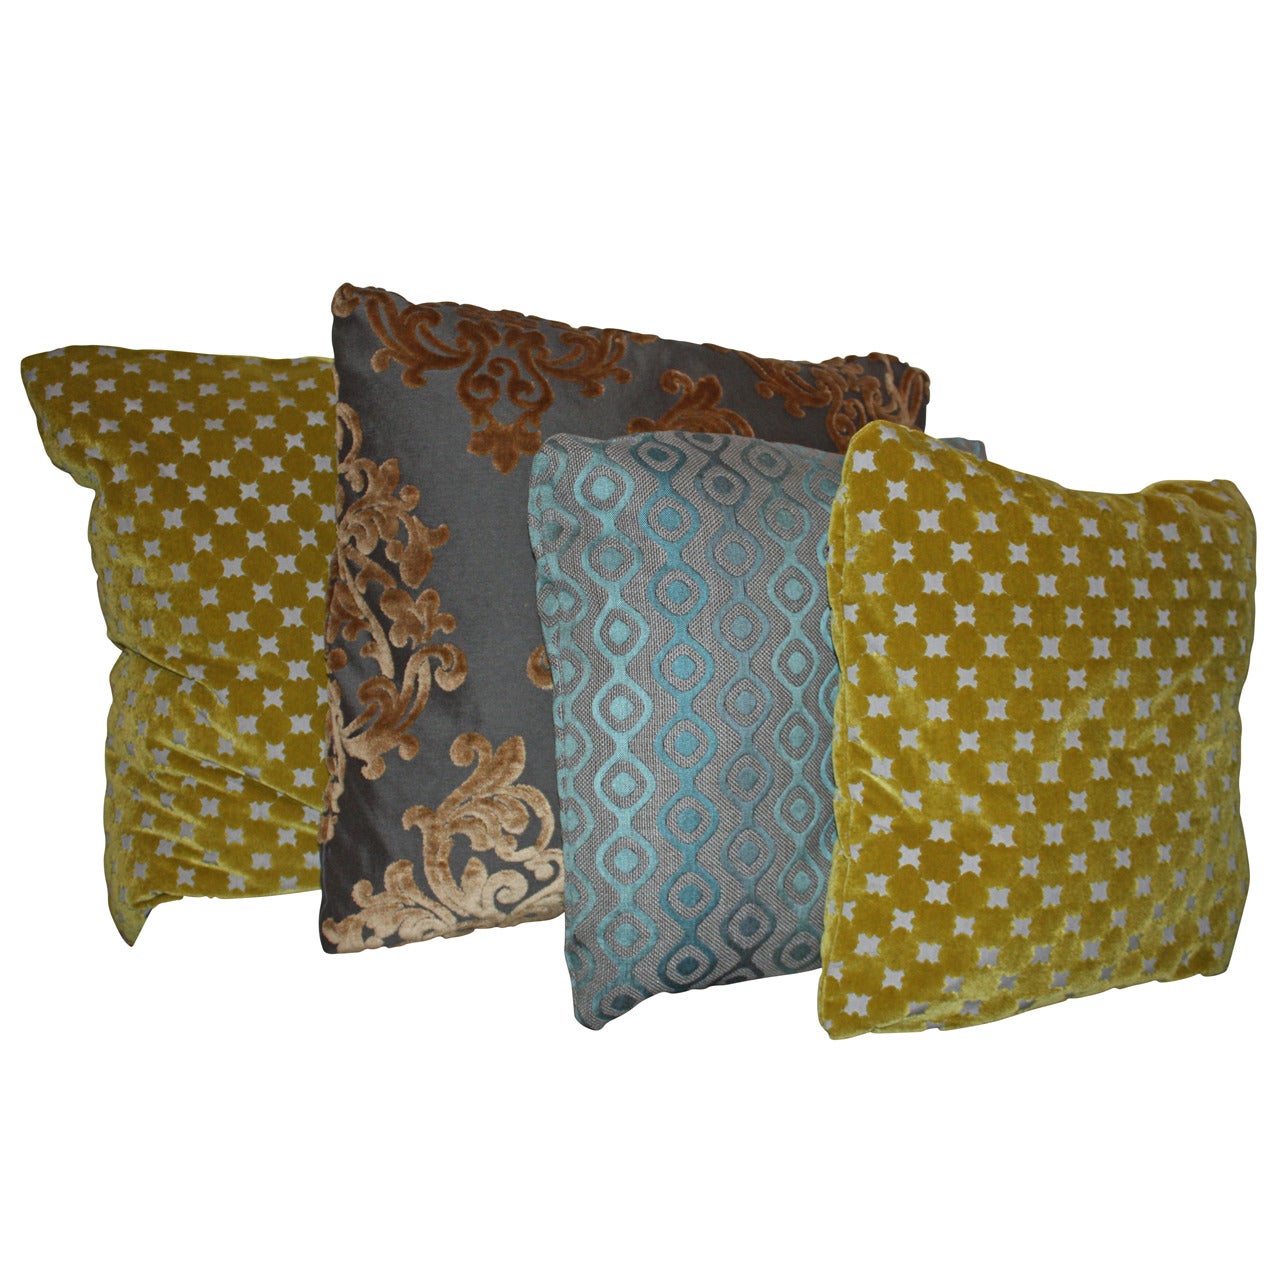 New Pillows in French Vintage Pattern Fabric